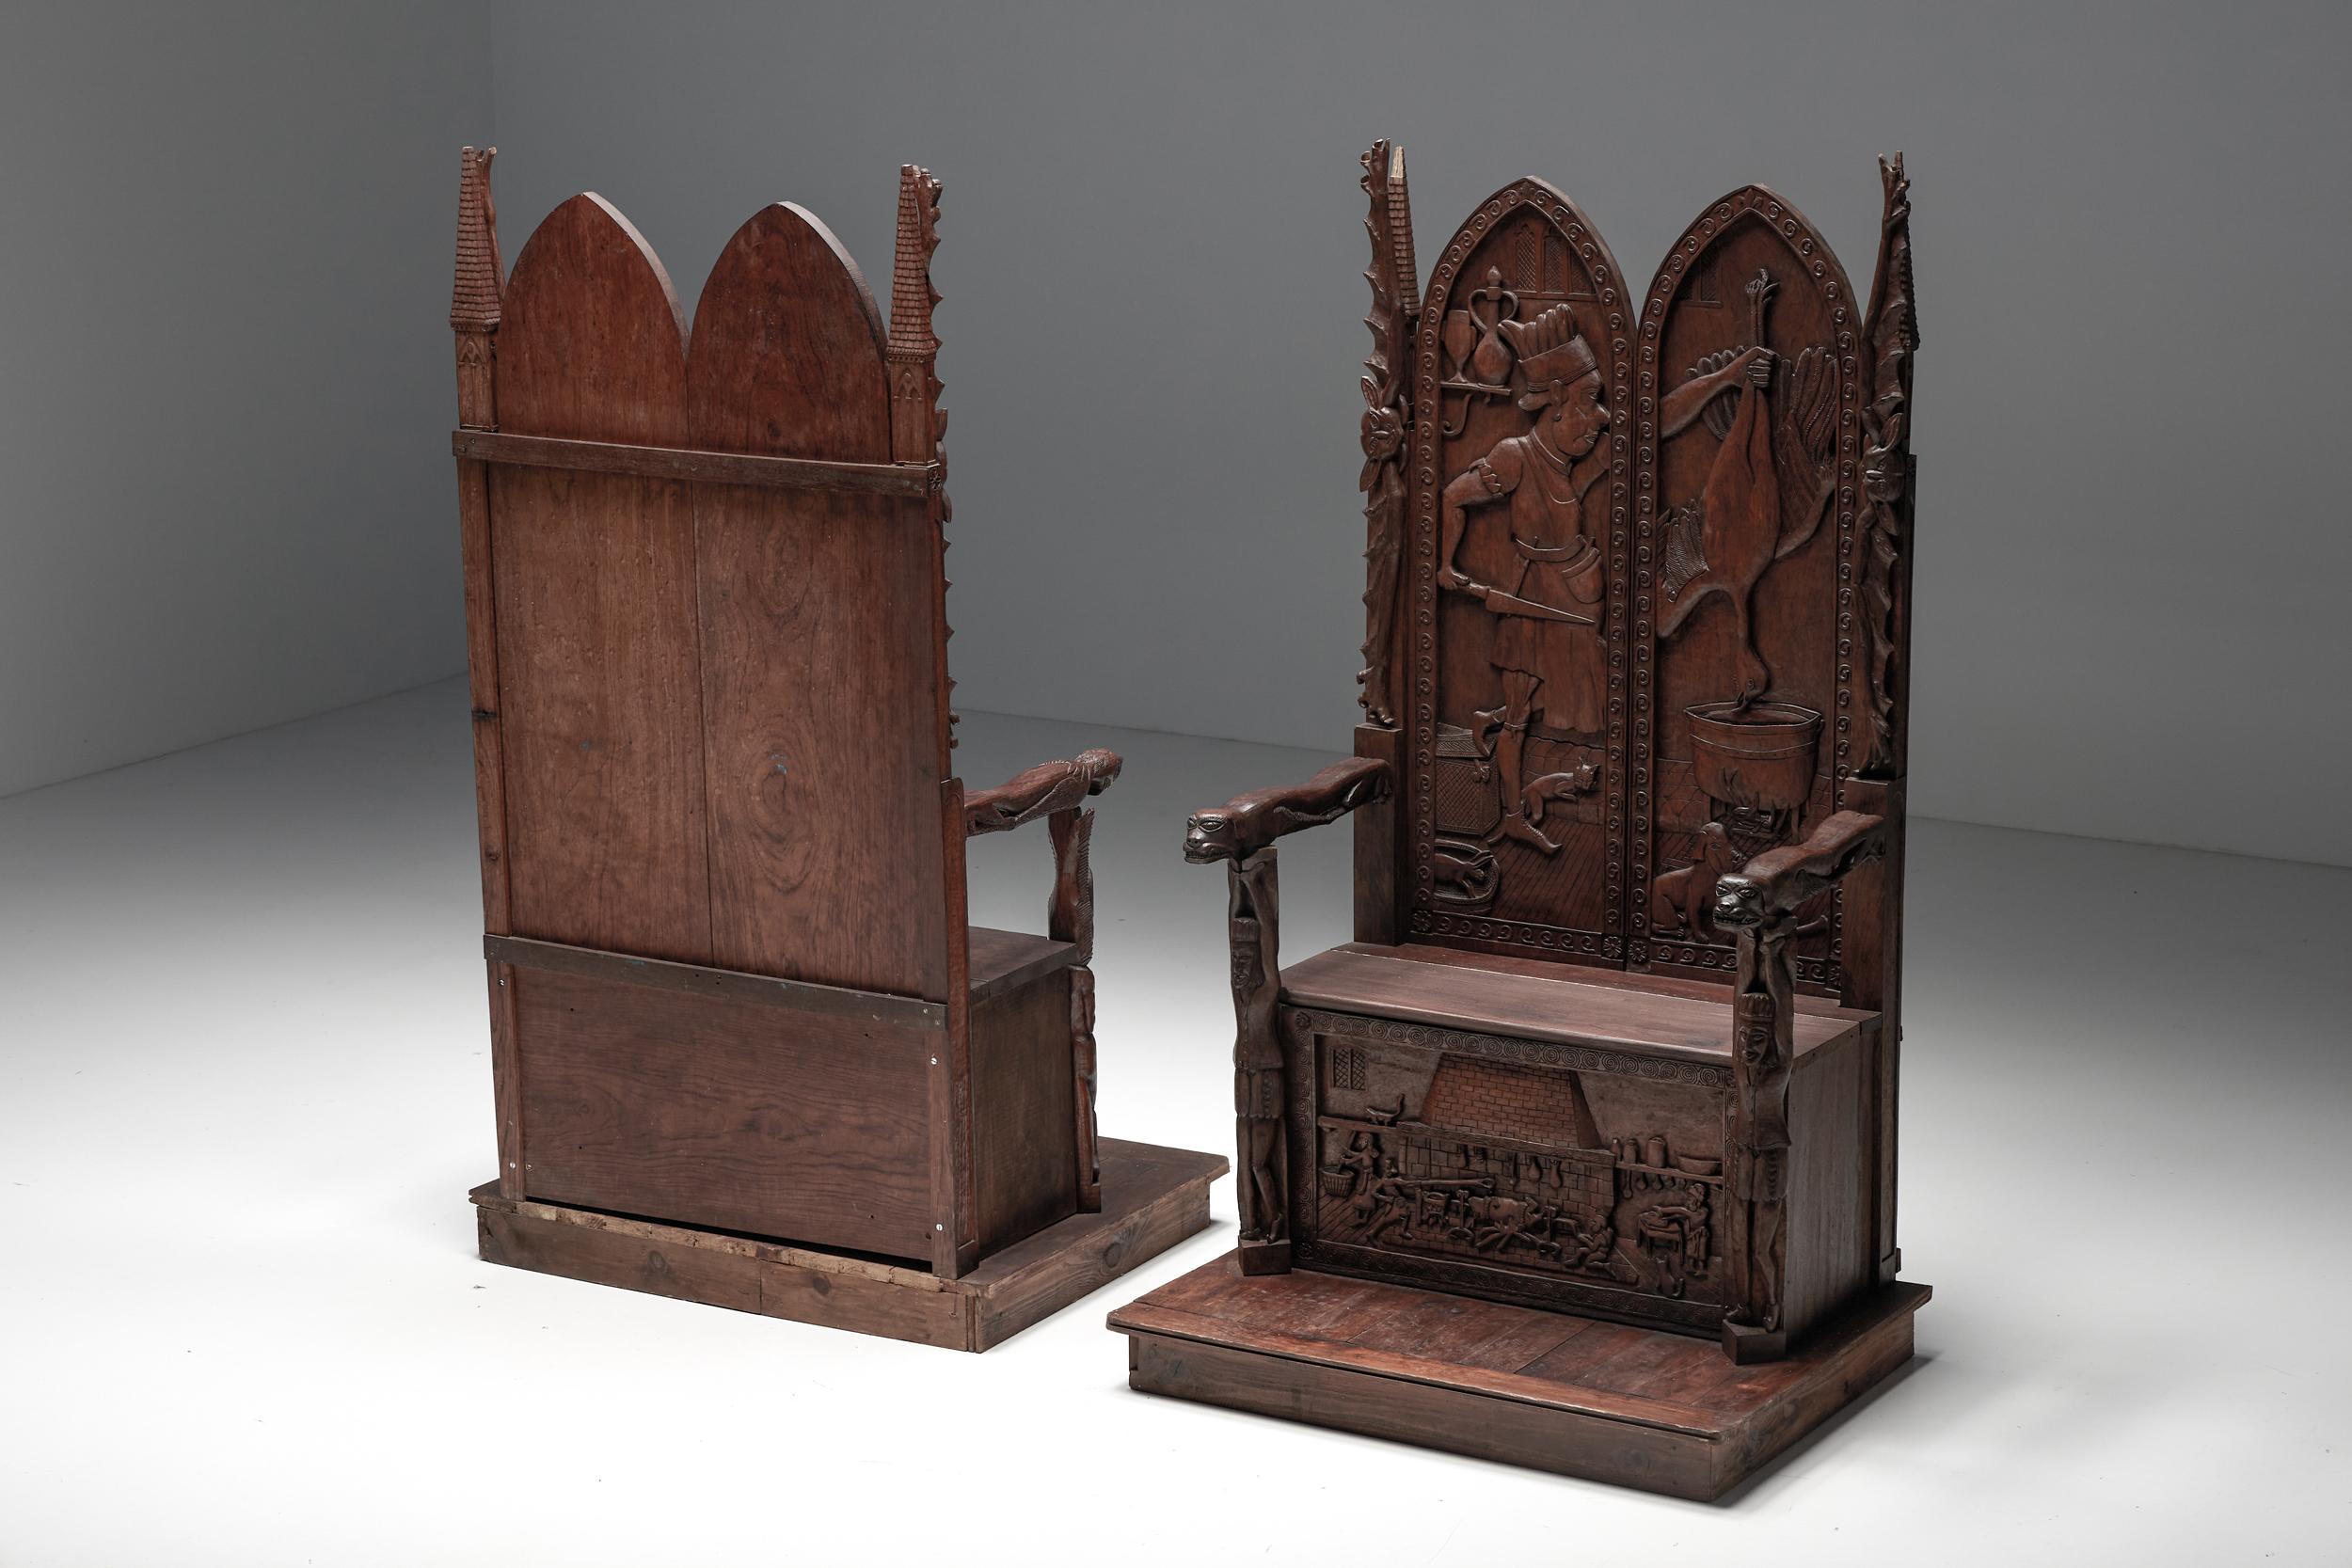 medieval throne